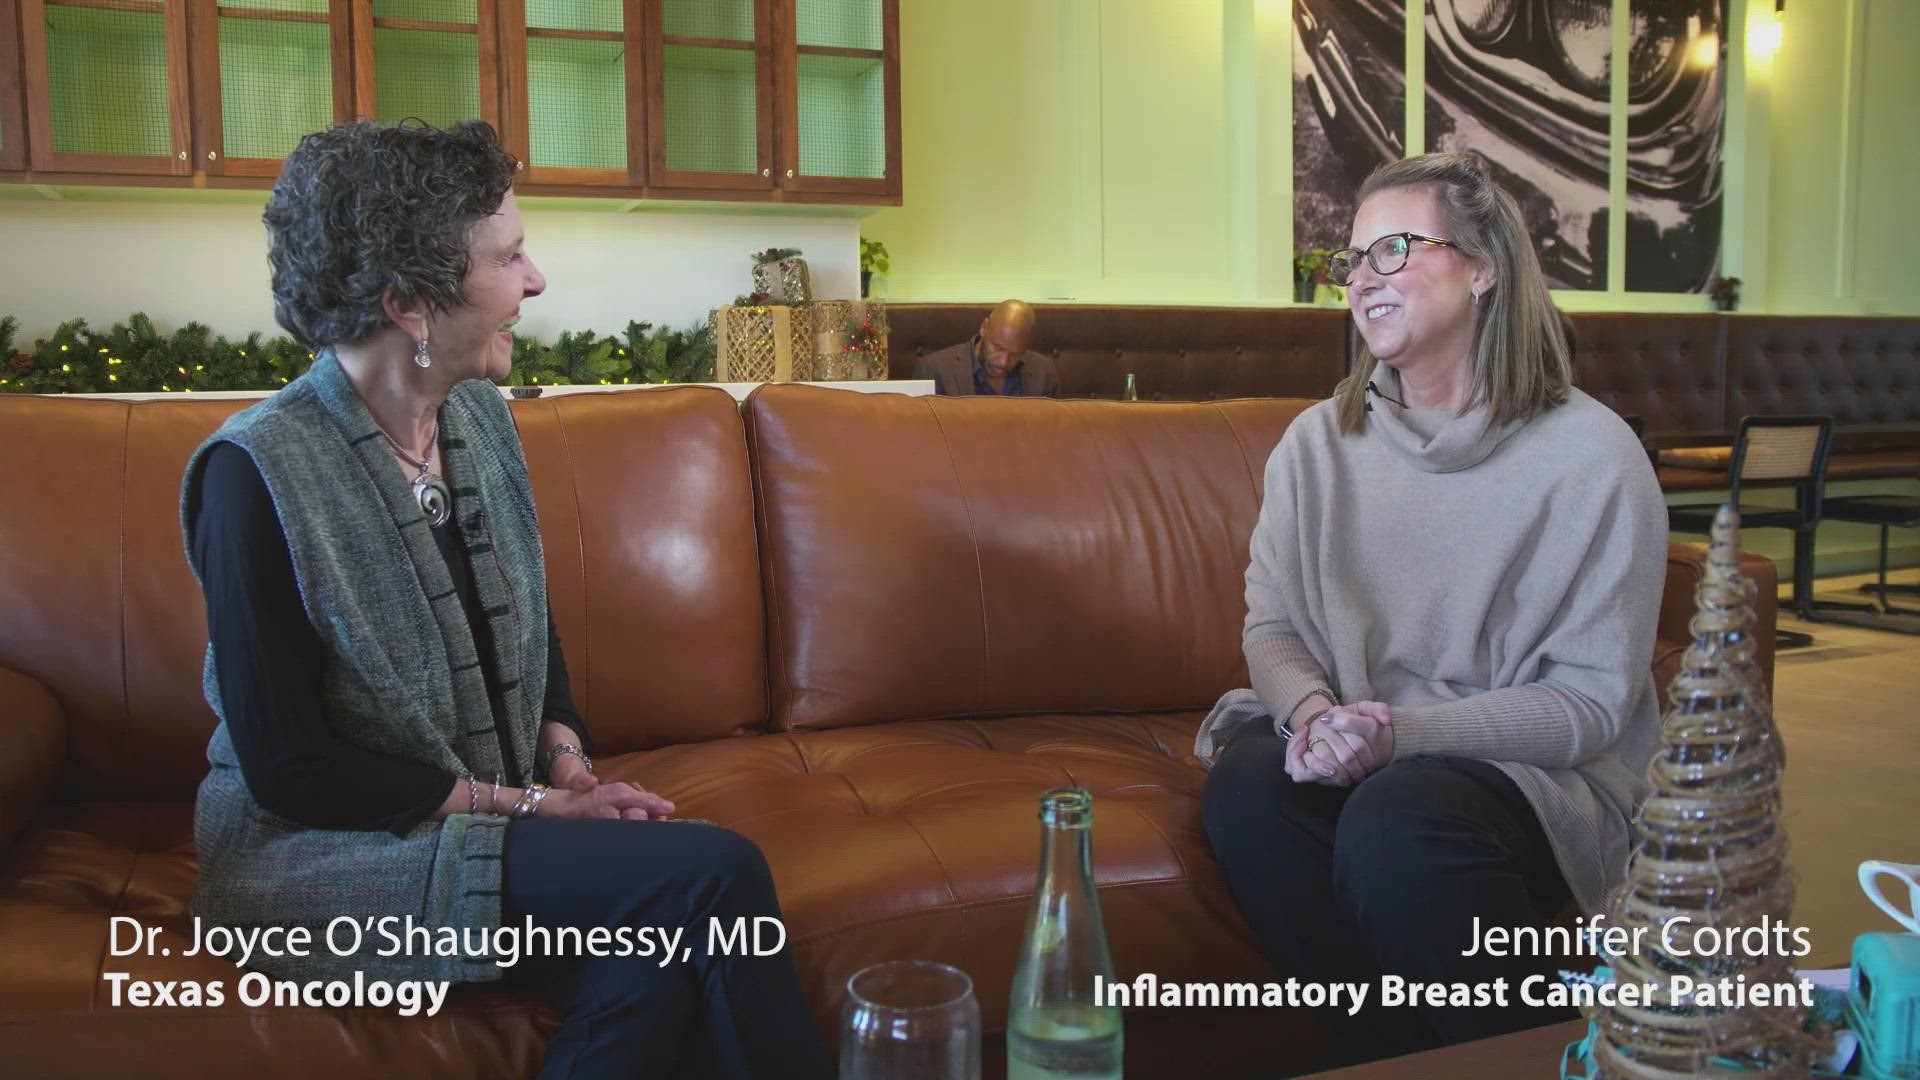 Dr. Joyce O'Shaughnessy, a Dallas-based oncologist with Texas Oncology, answers questions about Inflammatory Breast Cancer from Jennifer Cordts.